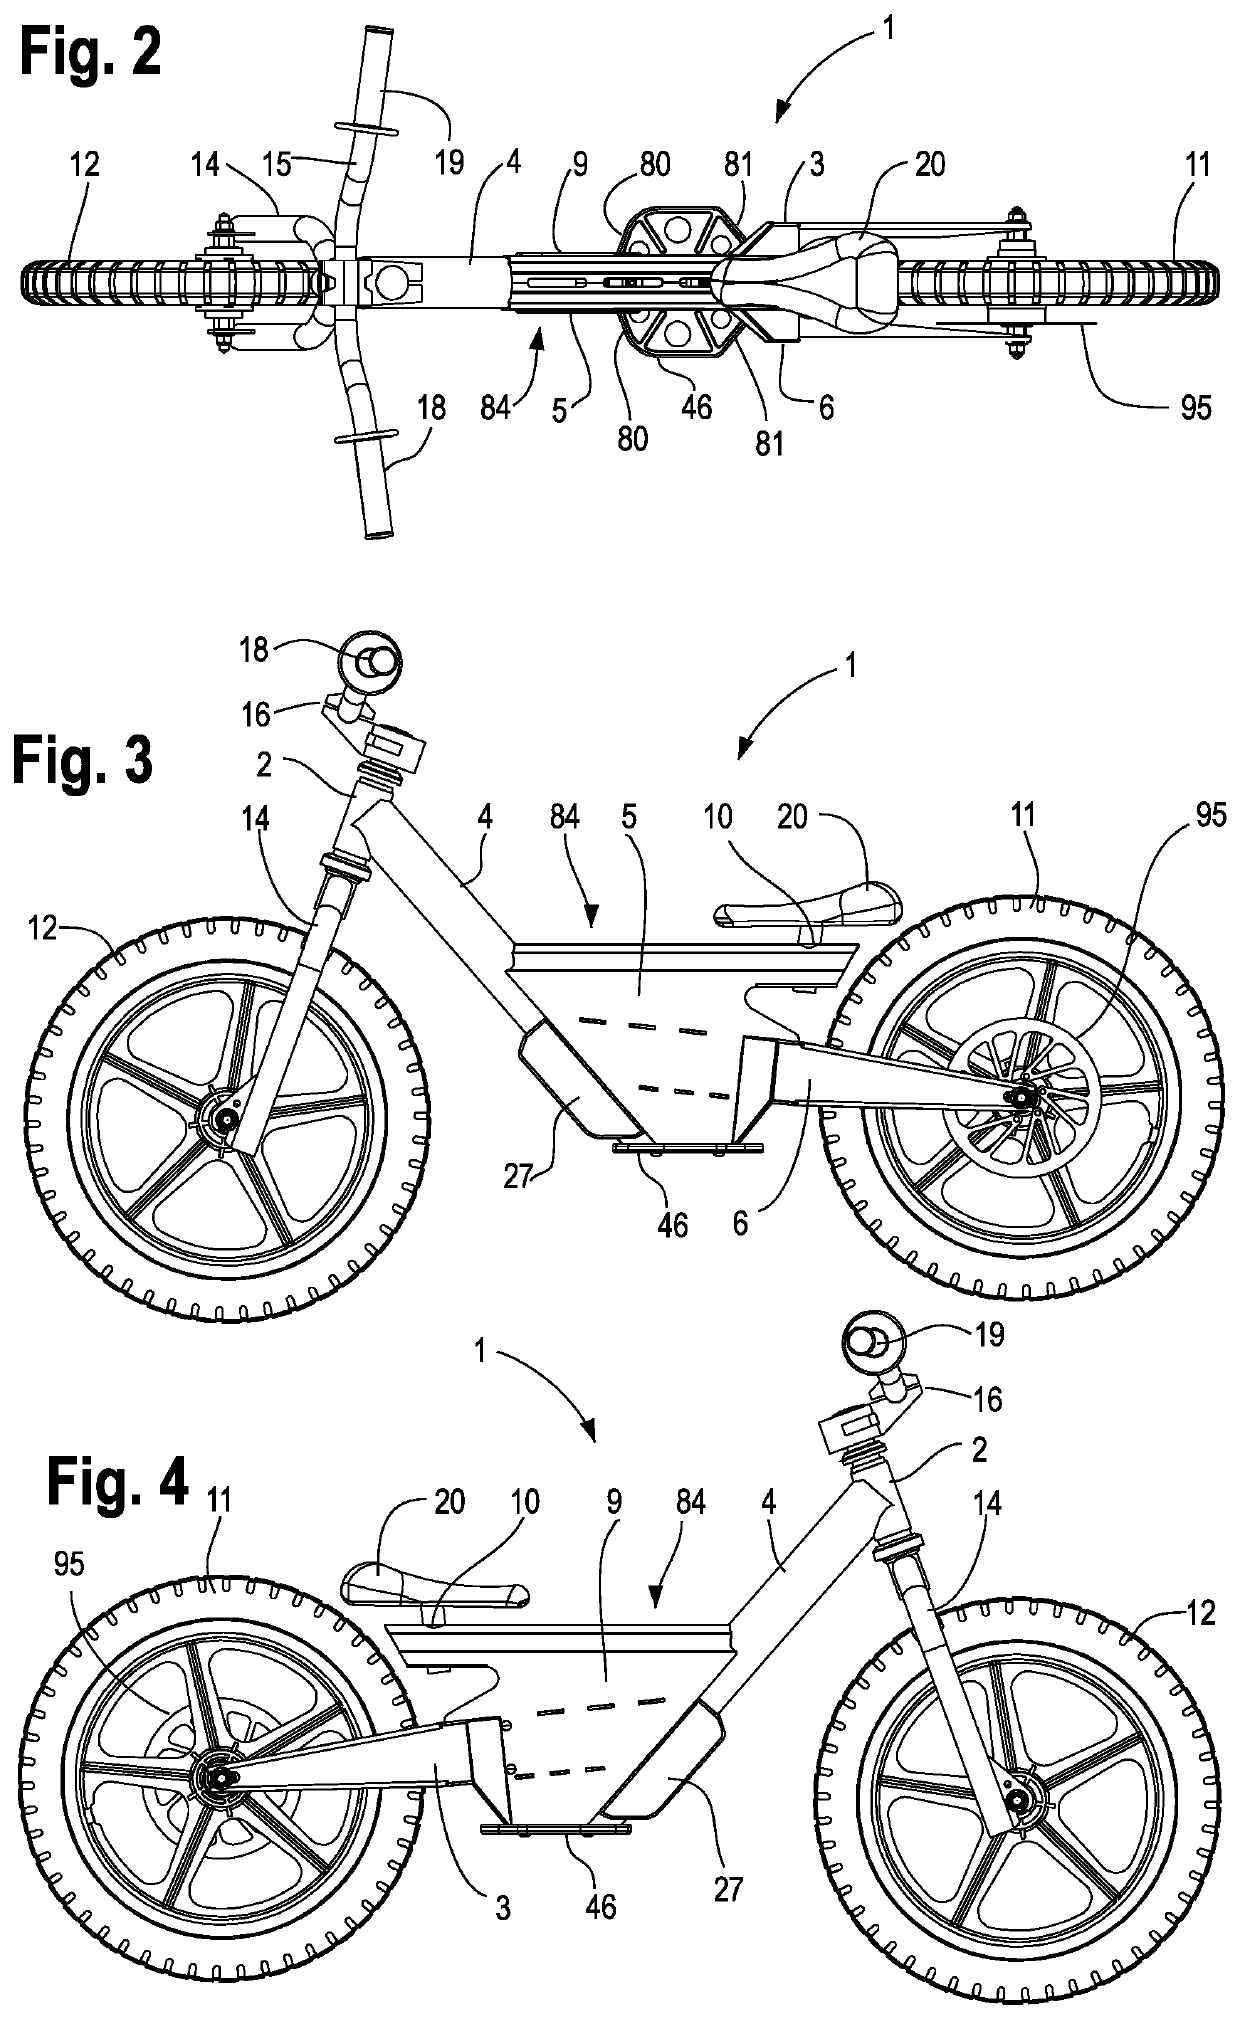 Convertible motorized running cycle